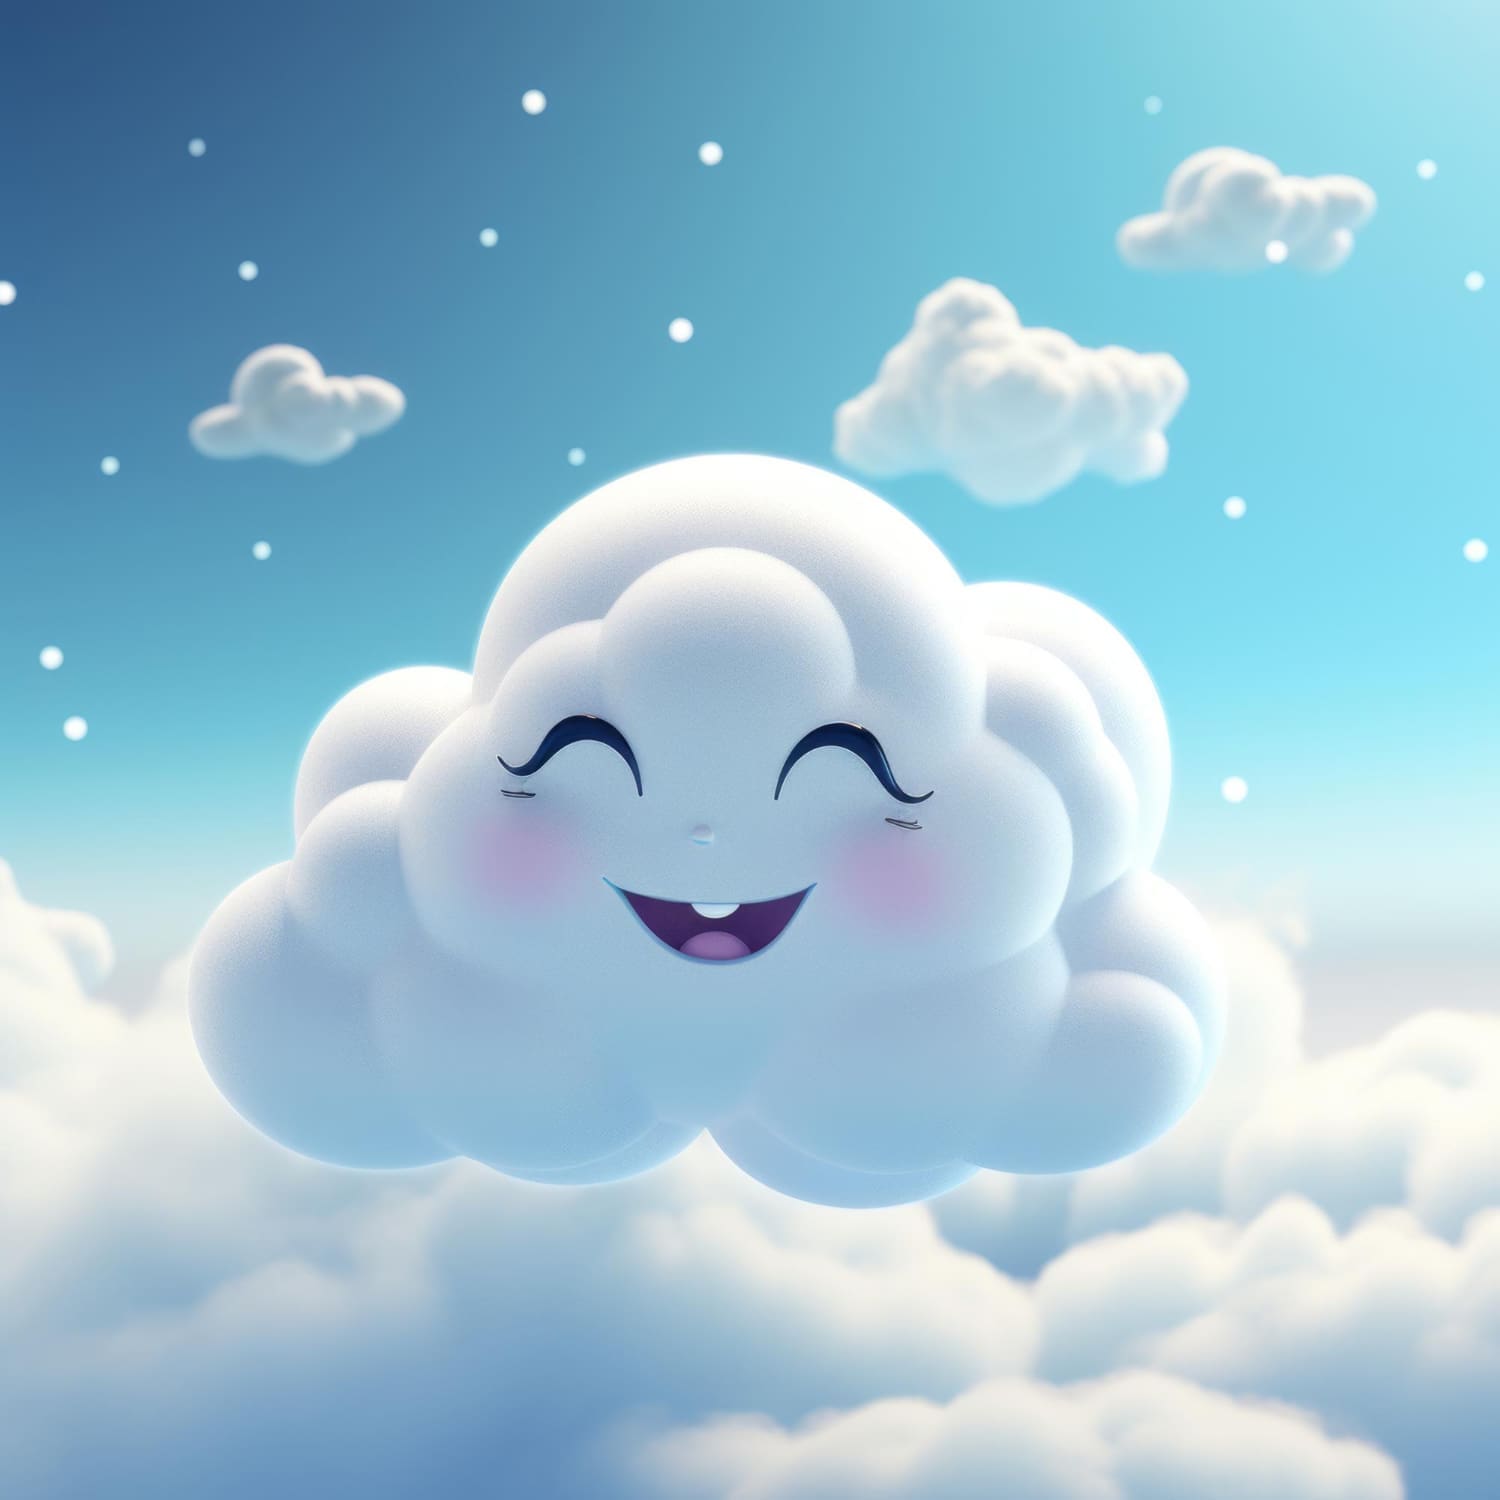 Cartoon graphic of a smiling blue sky with fluffy white clouds on a sunny day.